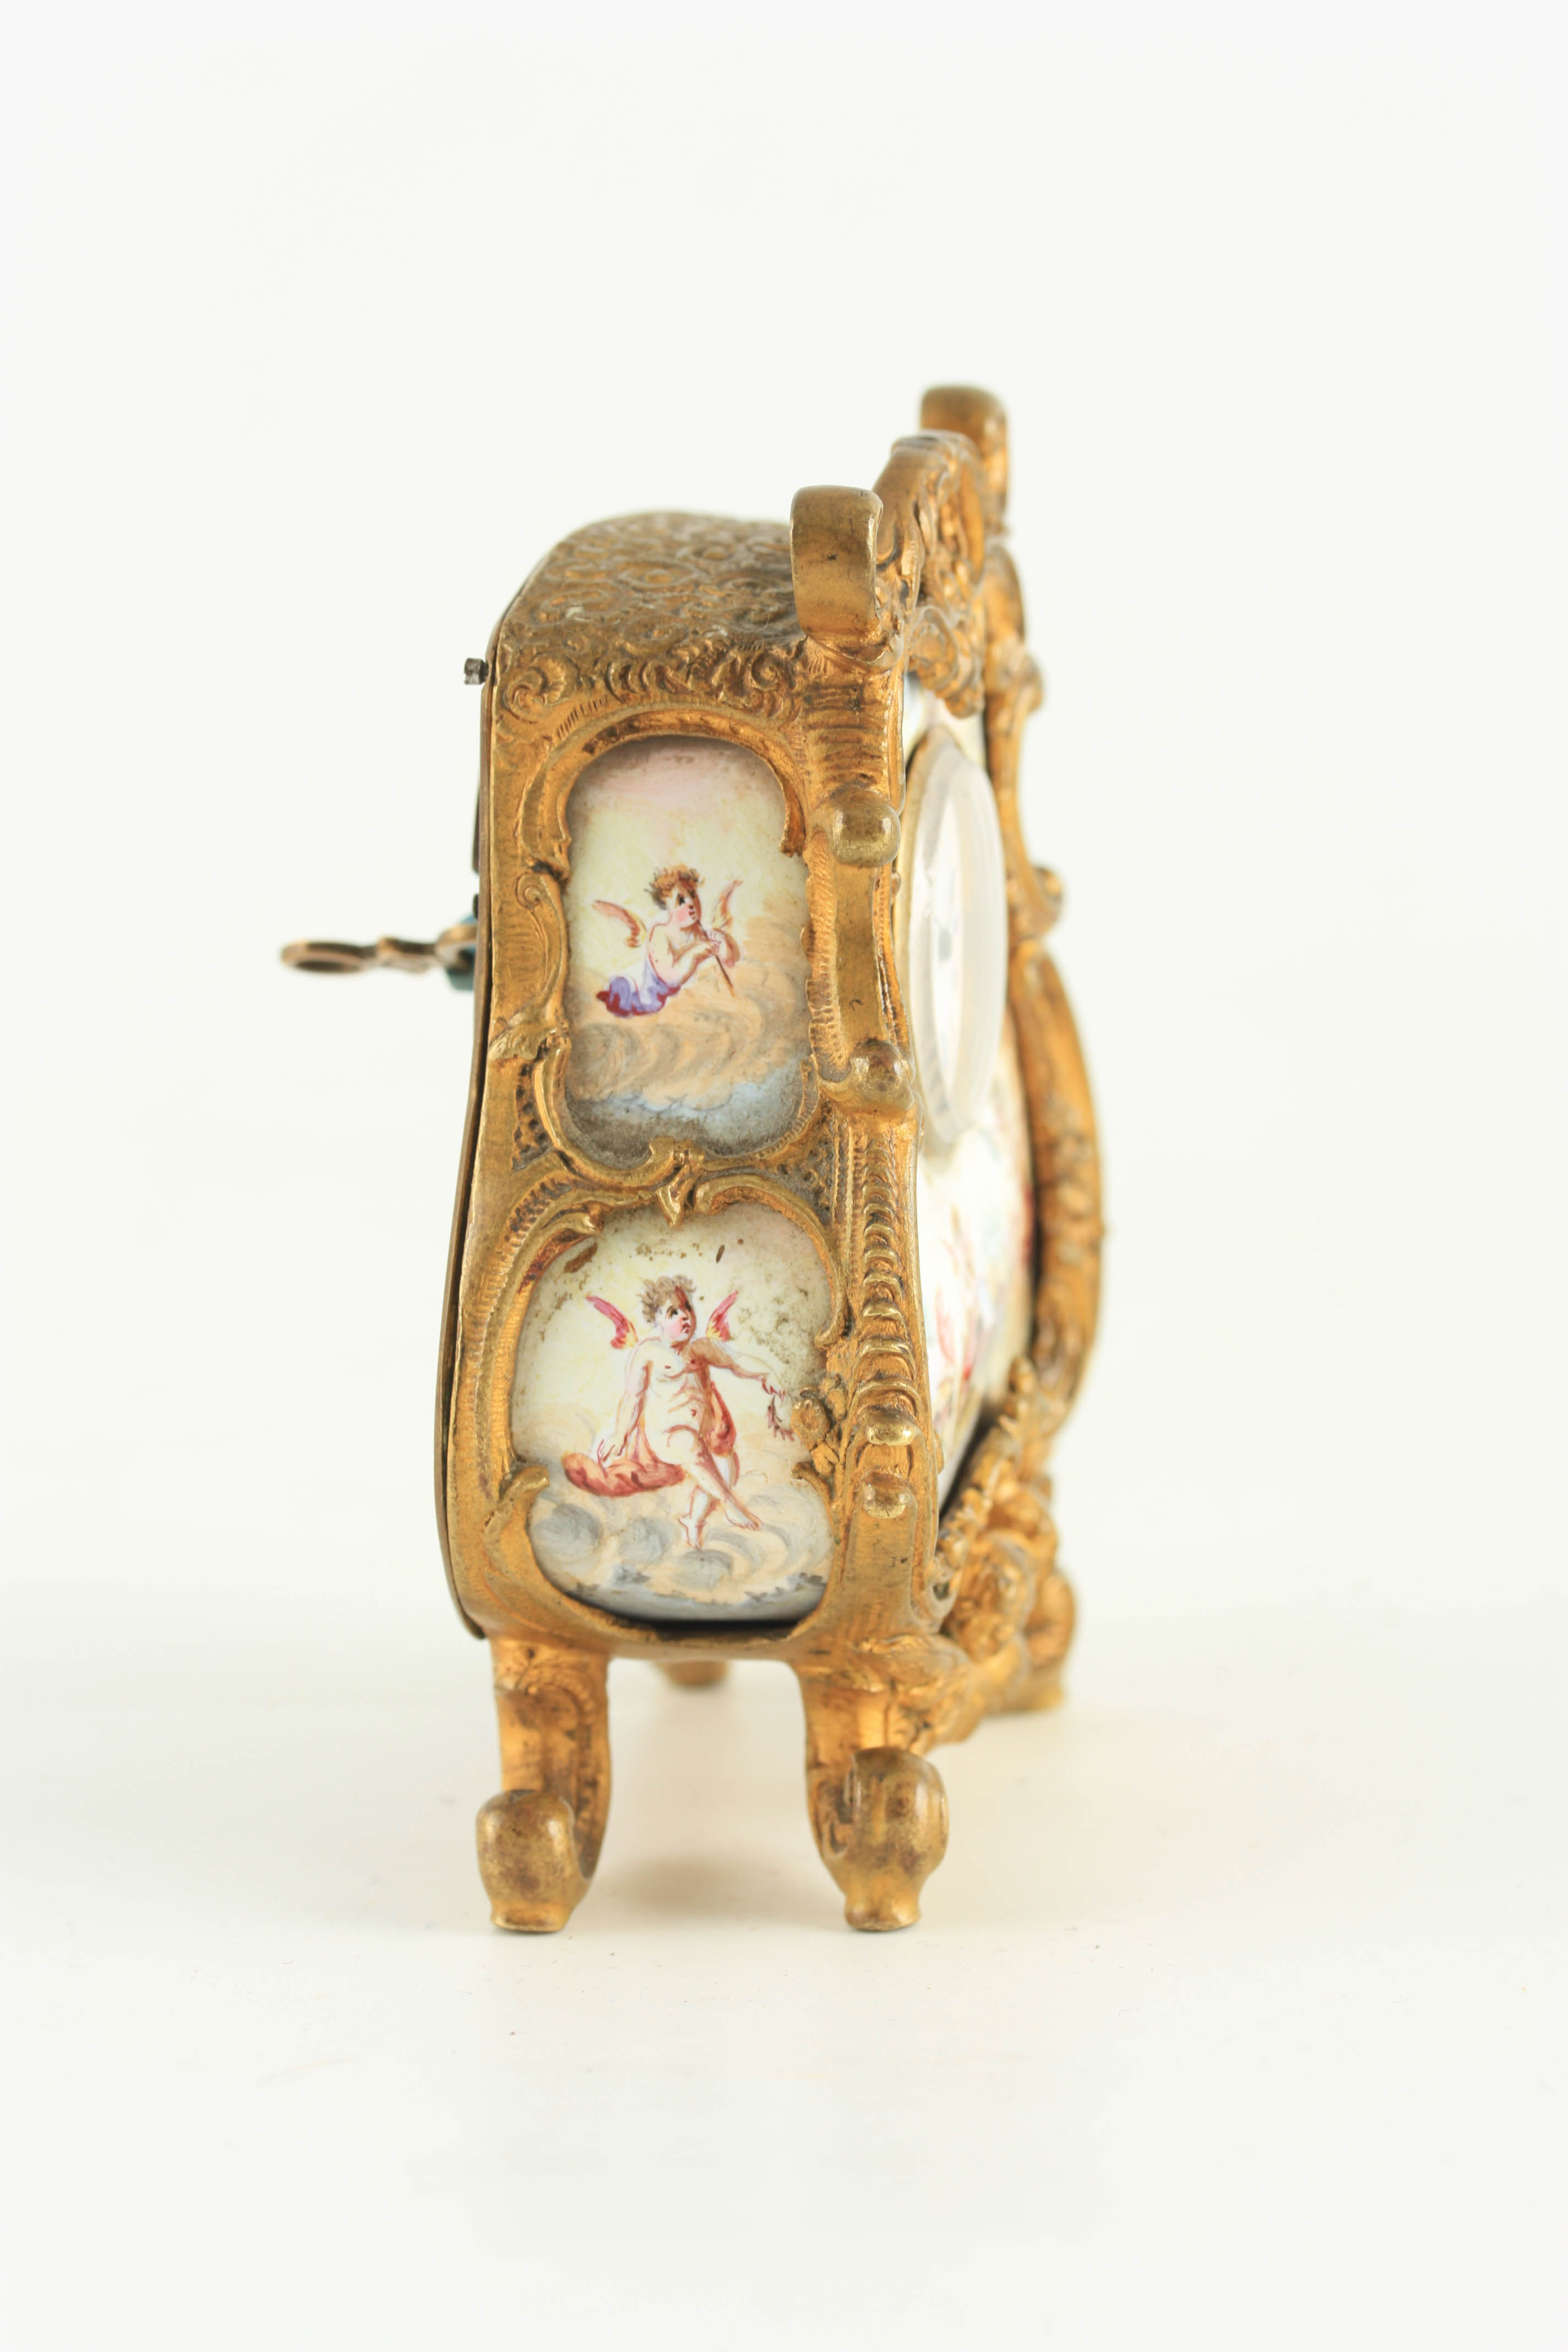 A LATE 19TH CENTURY VIENNESE ENAMEL AND GILT MOUNTED BOUDOIR CLOCK the bombe shaped case with rococo - Image 4 of 6